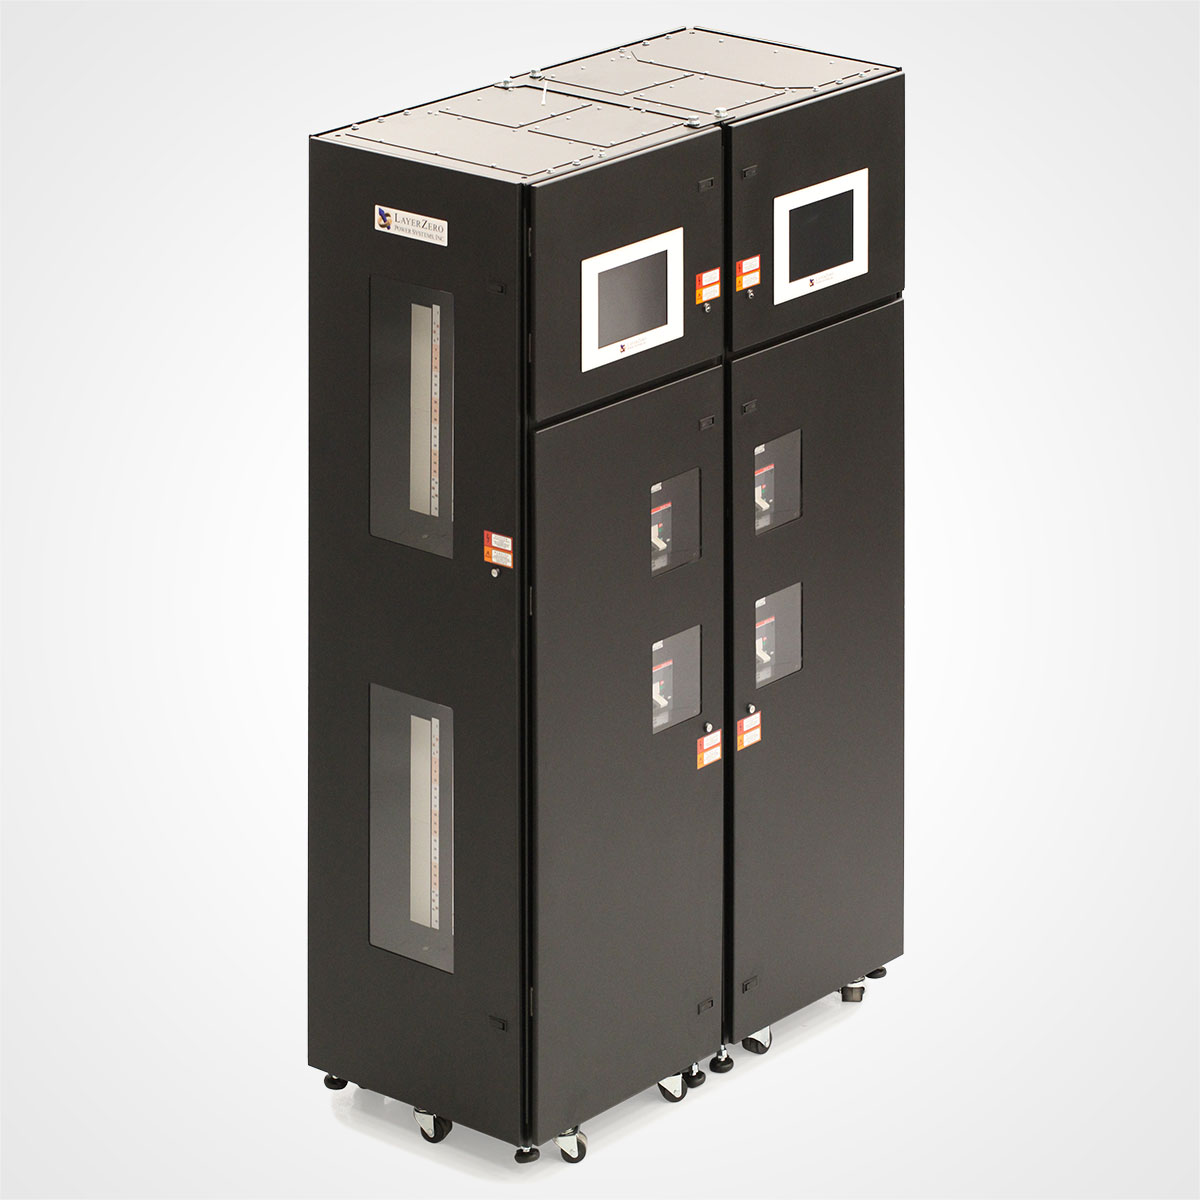 Two LayerZero Series 70: eRPP-FS Cabinets Side-By-Side.